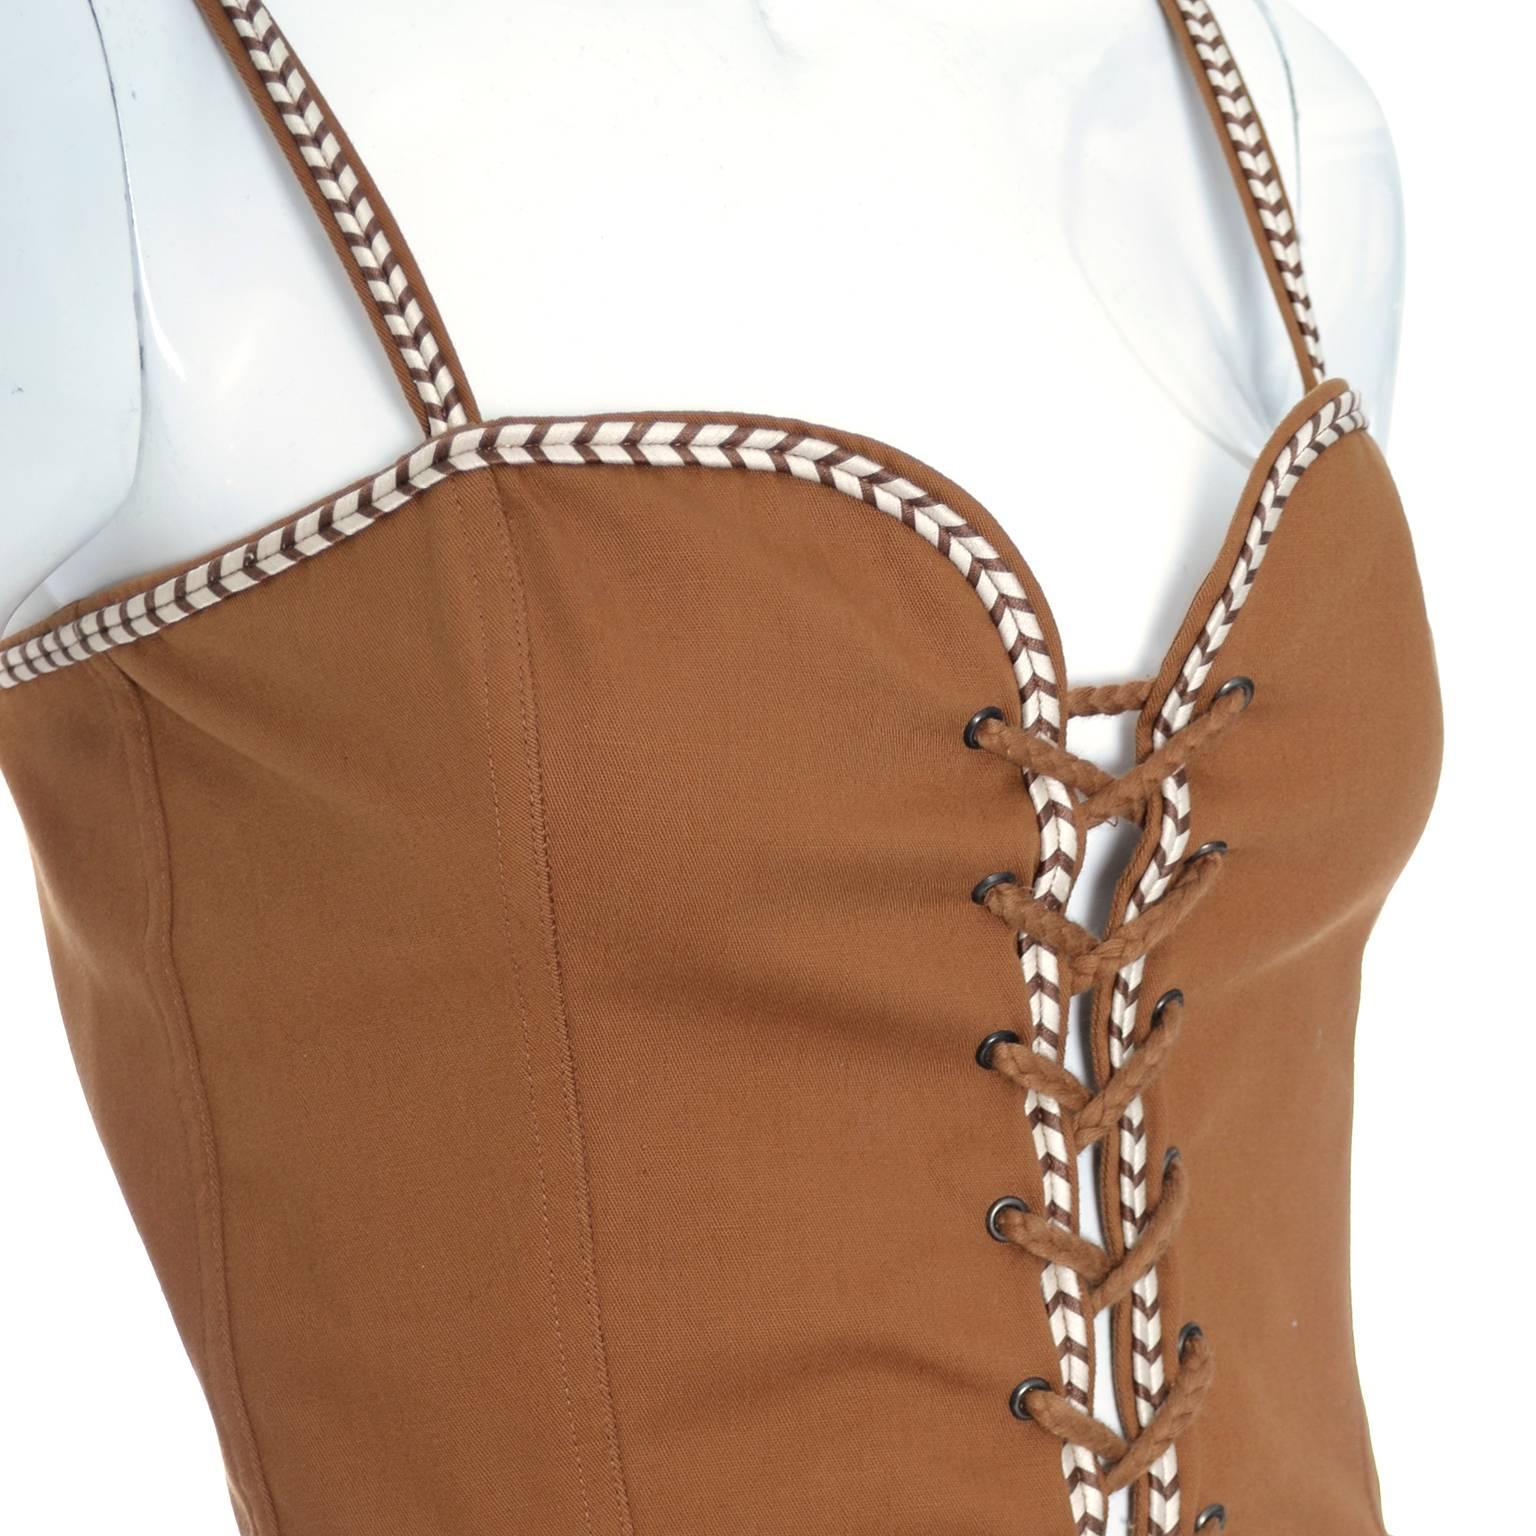 This is a fabulous vintage Yves Saint Laurent copper cotton bustier with laces up the front and wonderful trim. This vintage YSL top was made in France in the late 1970's and is in excellent condition.  This corset style top is labeled a size 38 but